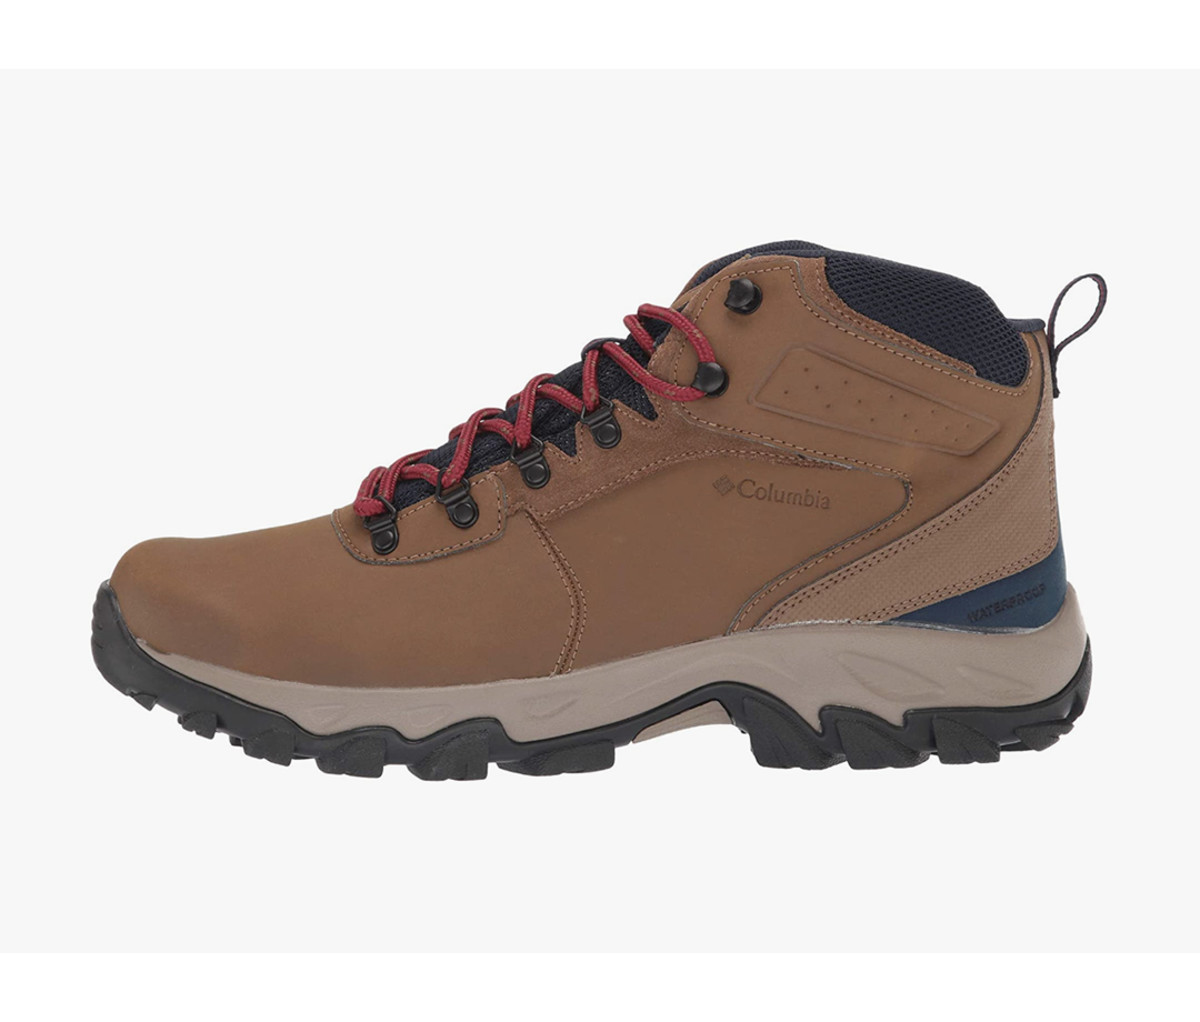 Winter is Coming and You Need These Columbia Waterproof Boots - Men's ...